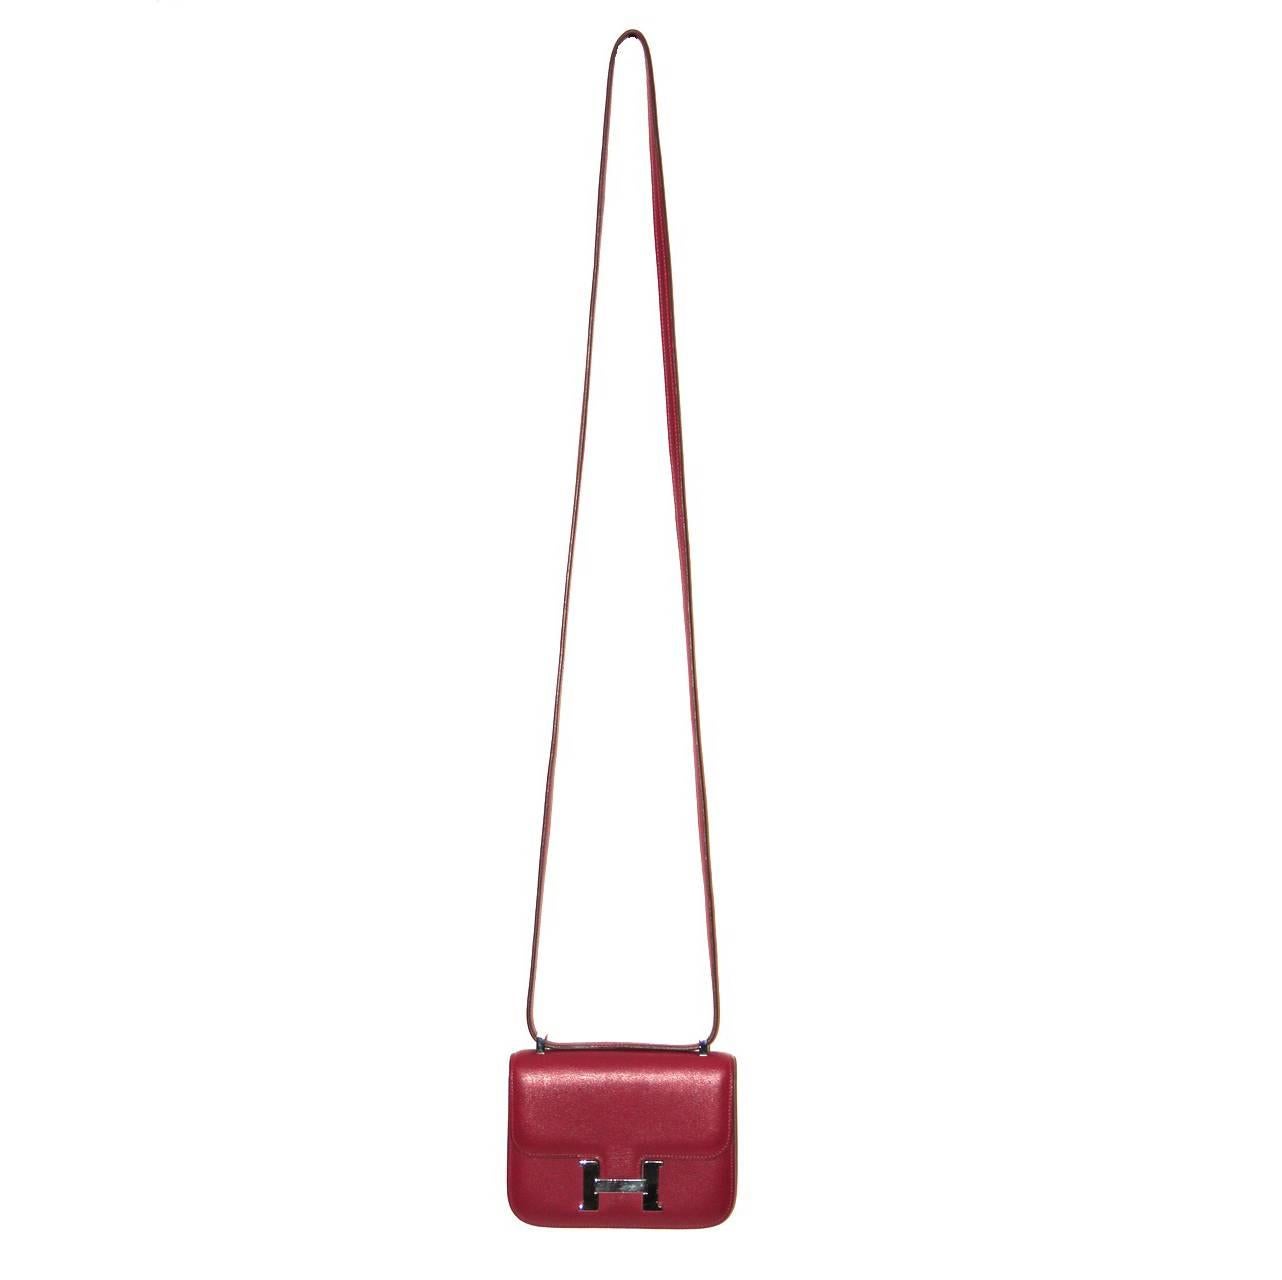 Very rare Micro Constance Micro. Its sleek lines, adjustable strap and silver-tone “H” clasp make the Constance the perfect statement bag. 
The Hermes Constance was first created back in 1959, and was constructed by in-house designer Catherine